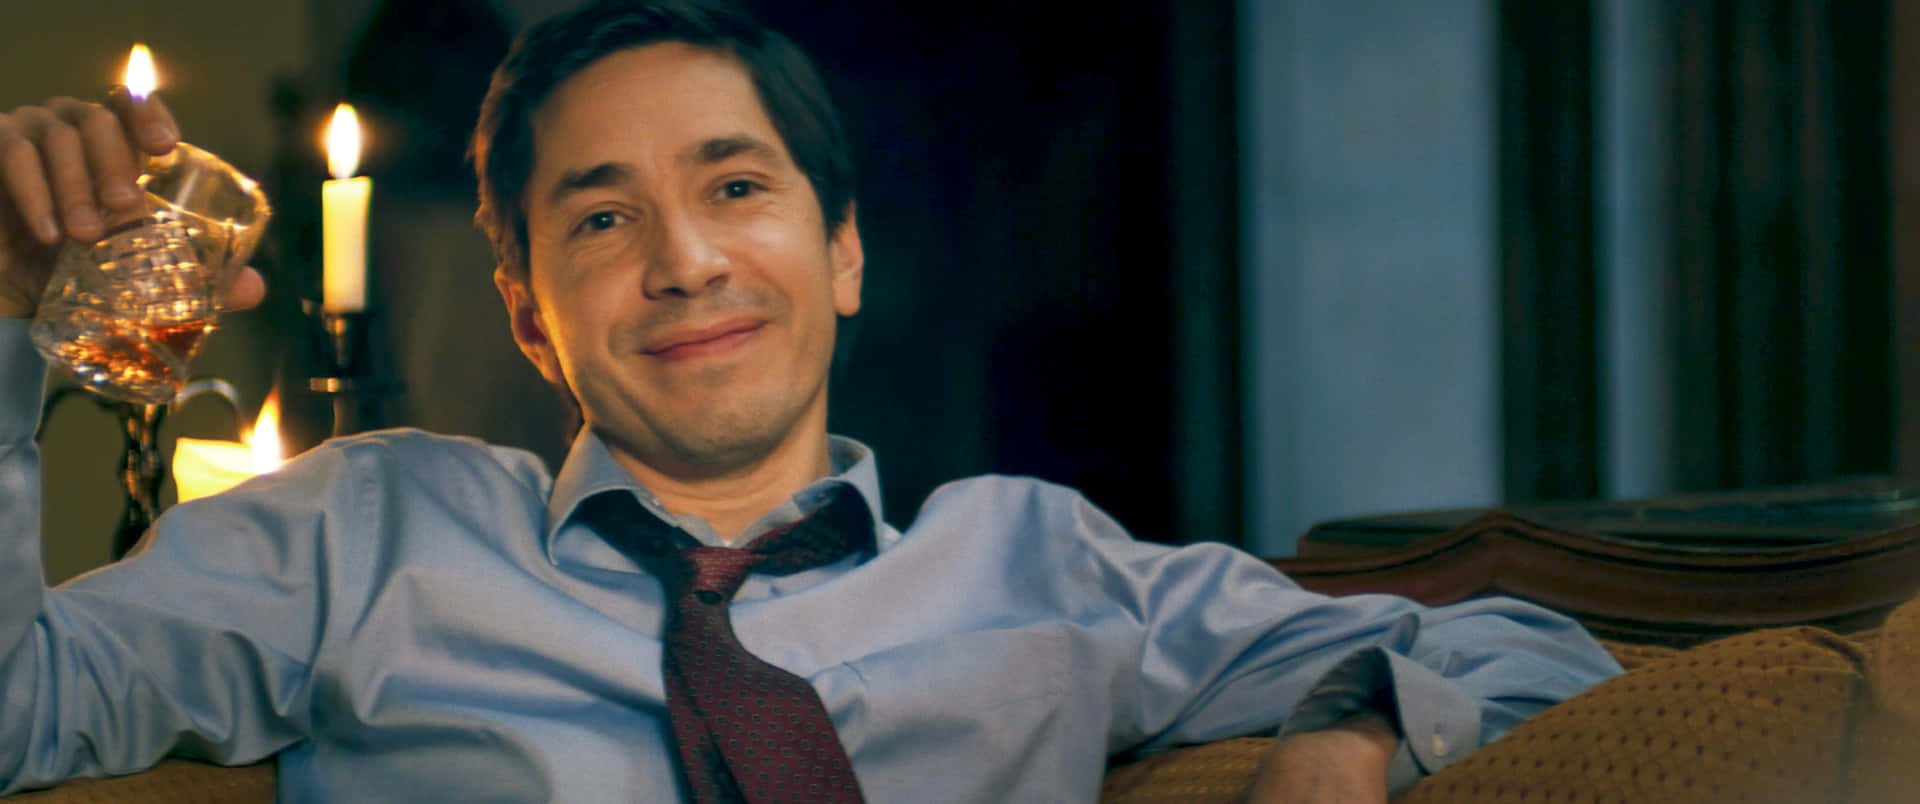 Justin Long posing in a casual photoshoot Wallpaper